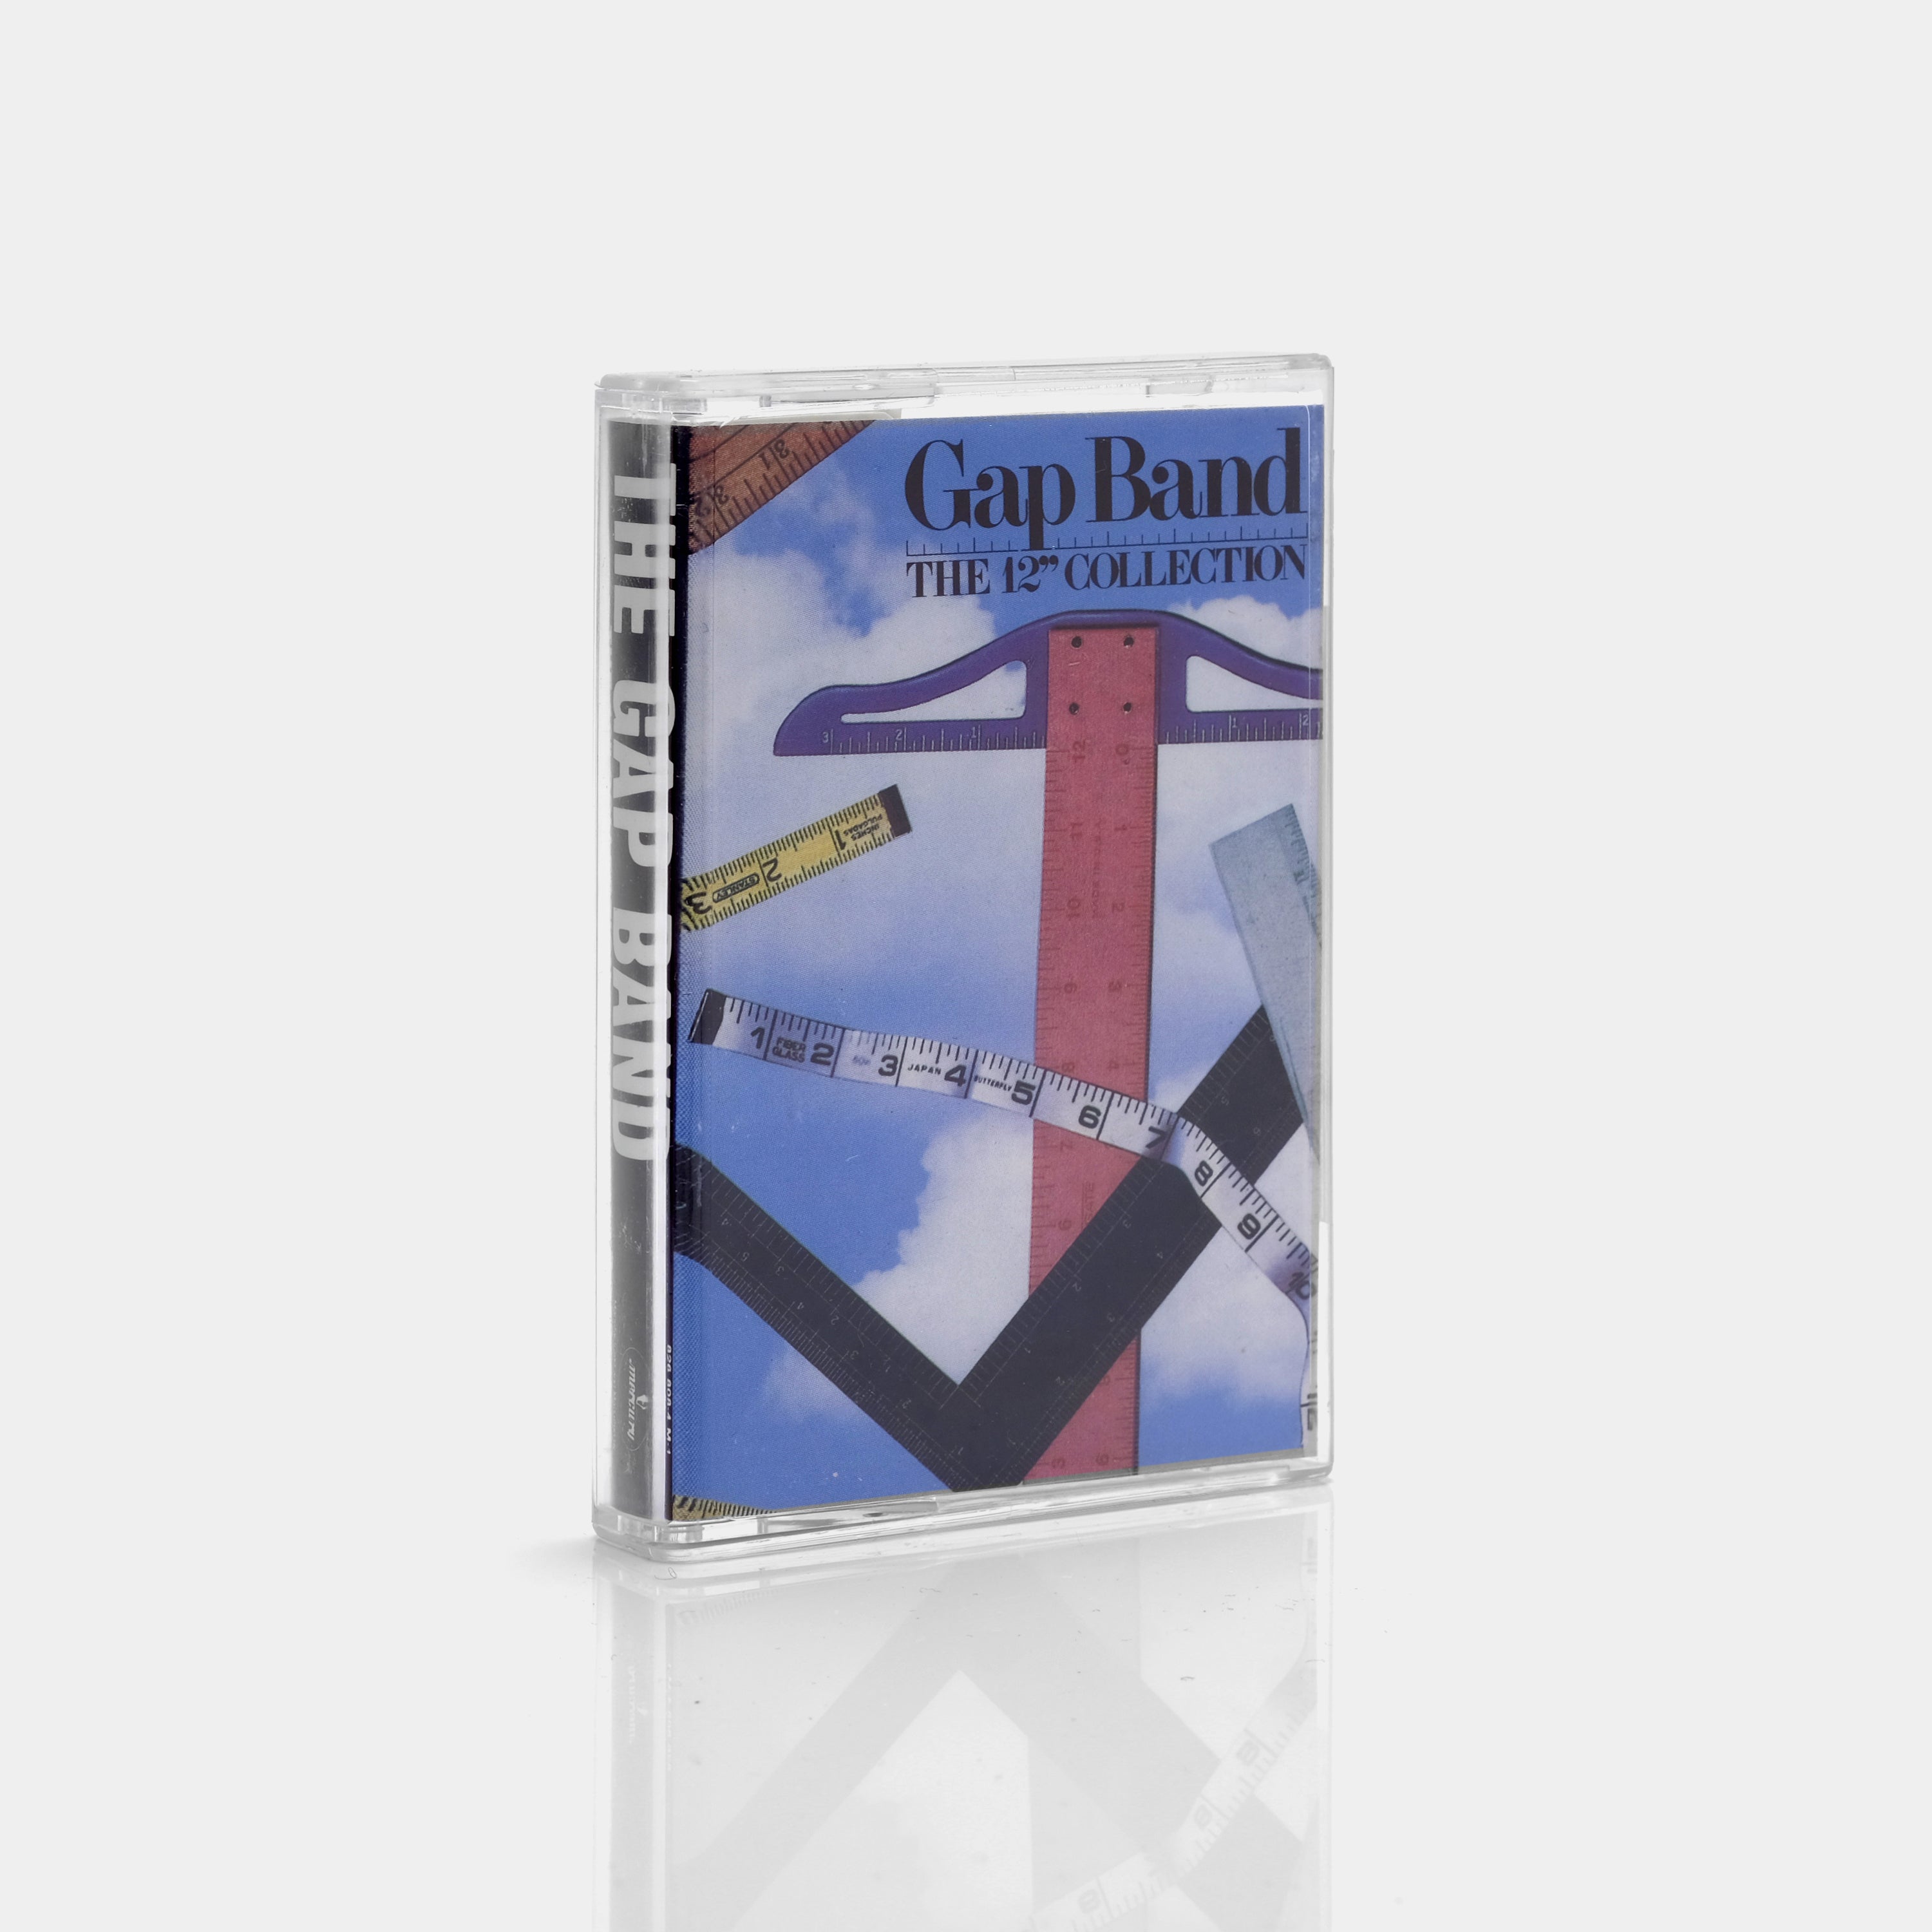 The Gap Band - The 12" Collection Cassette Tape